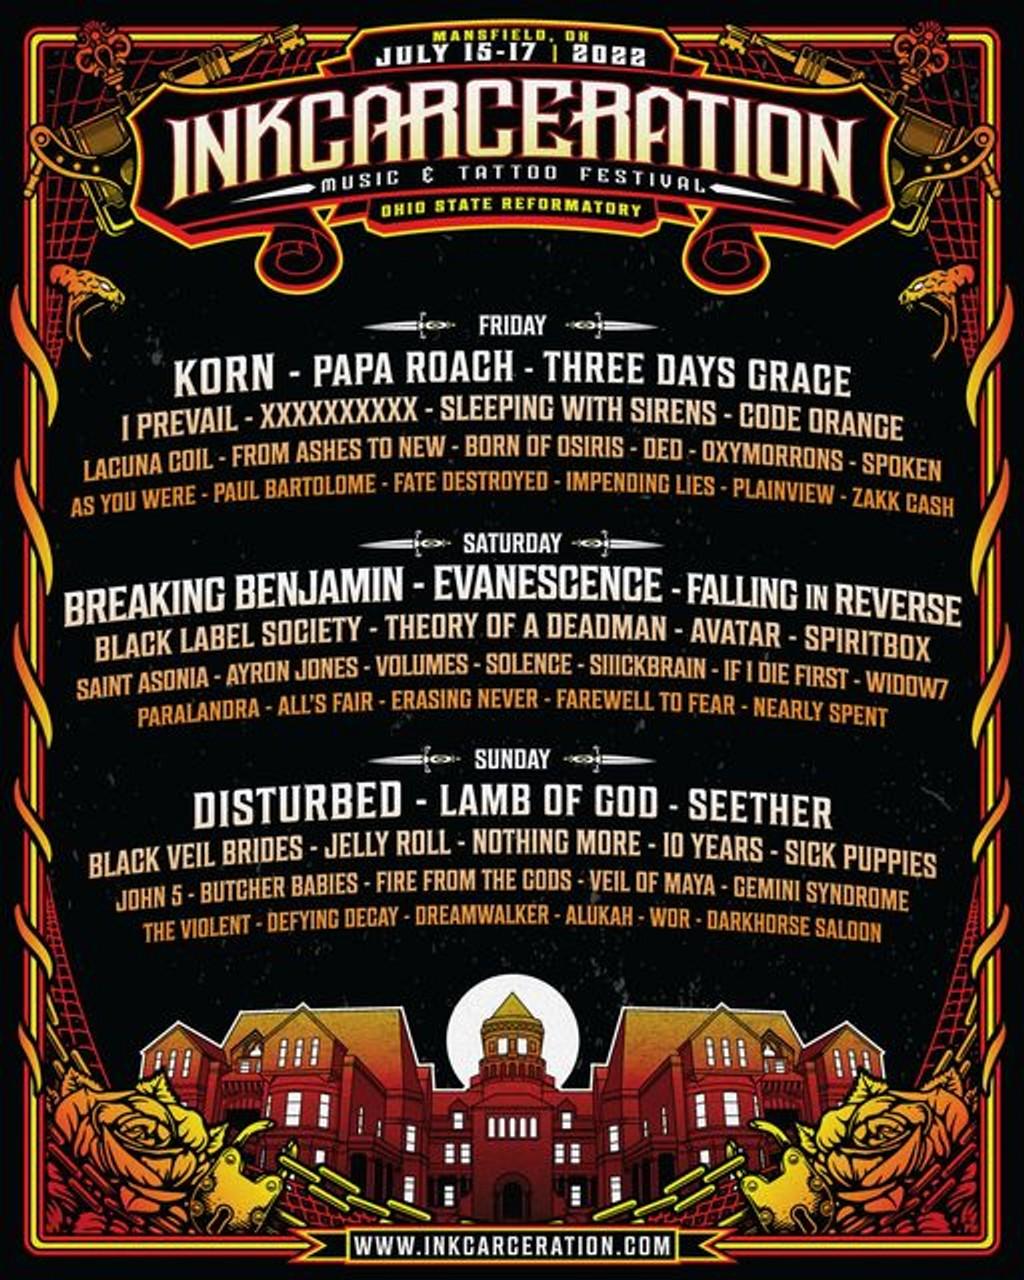 Lineup Poster Inkcarceration Festival 2022